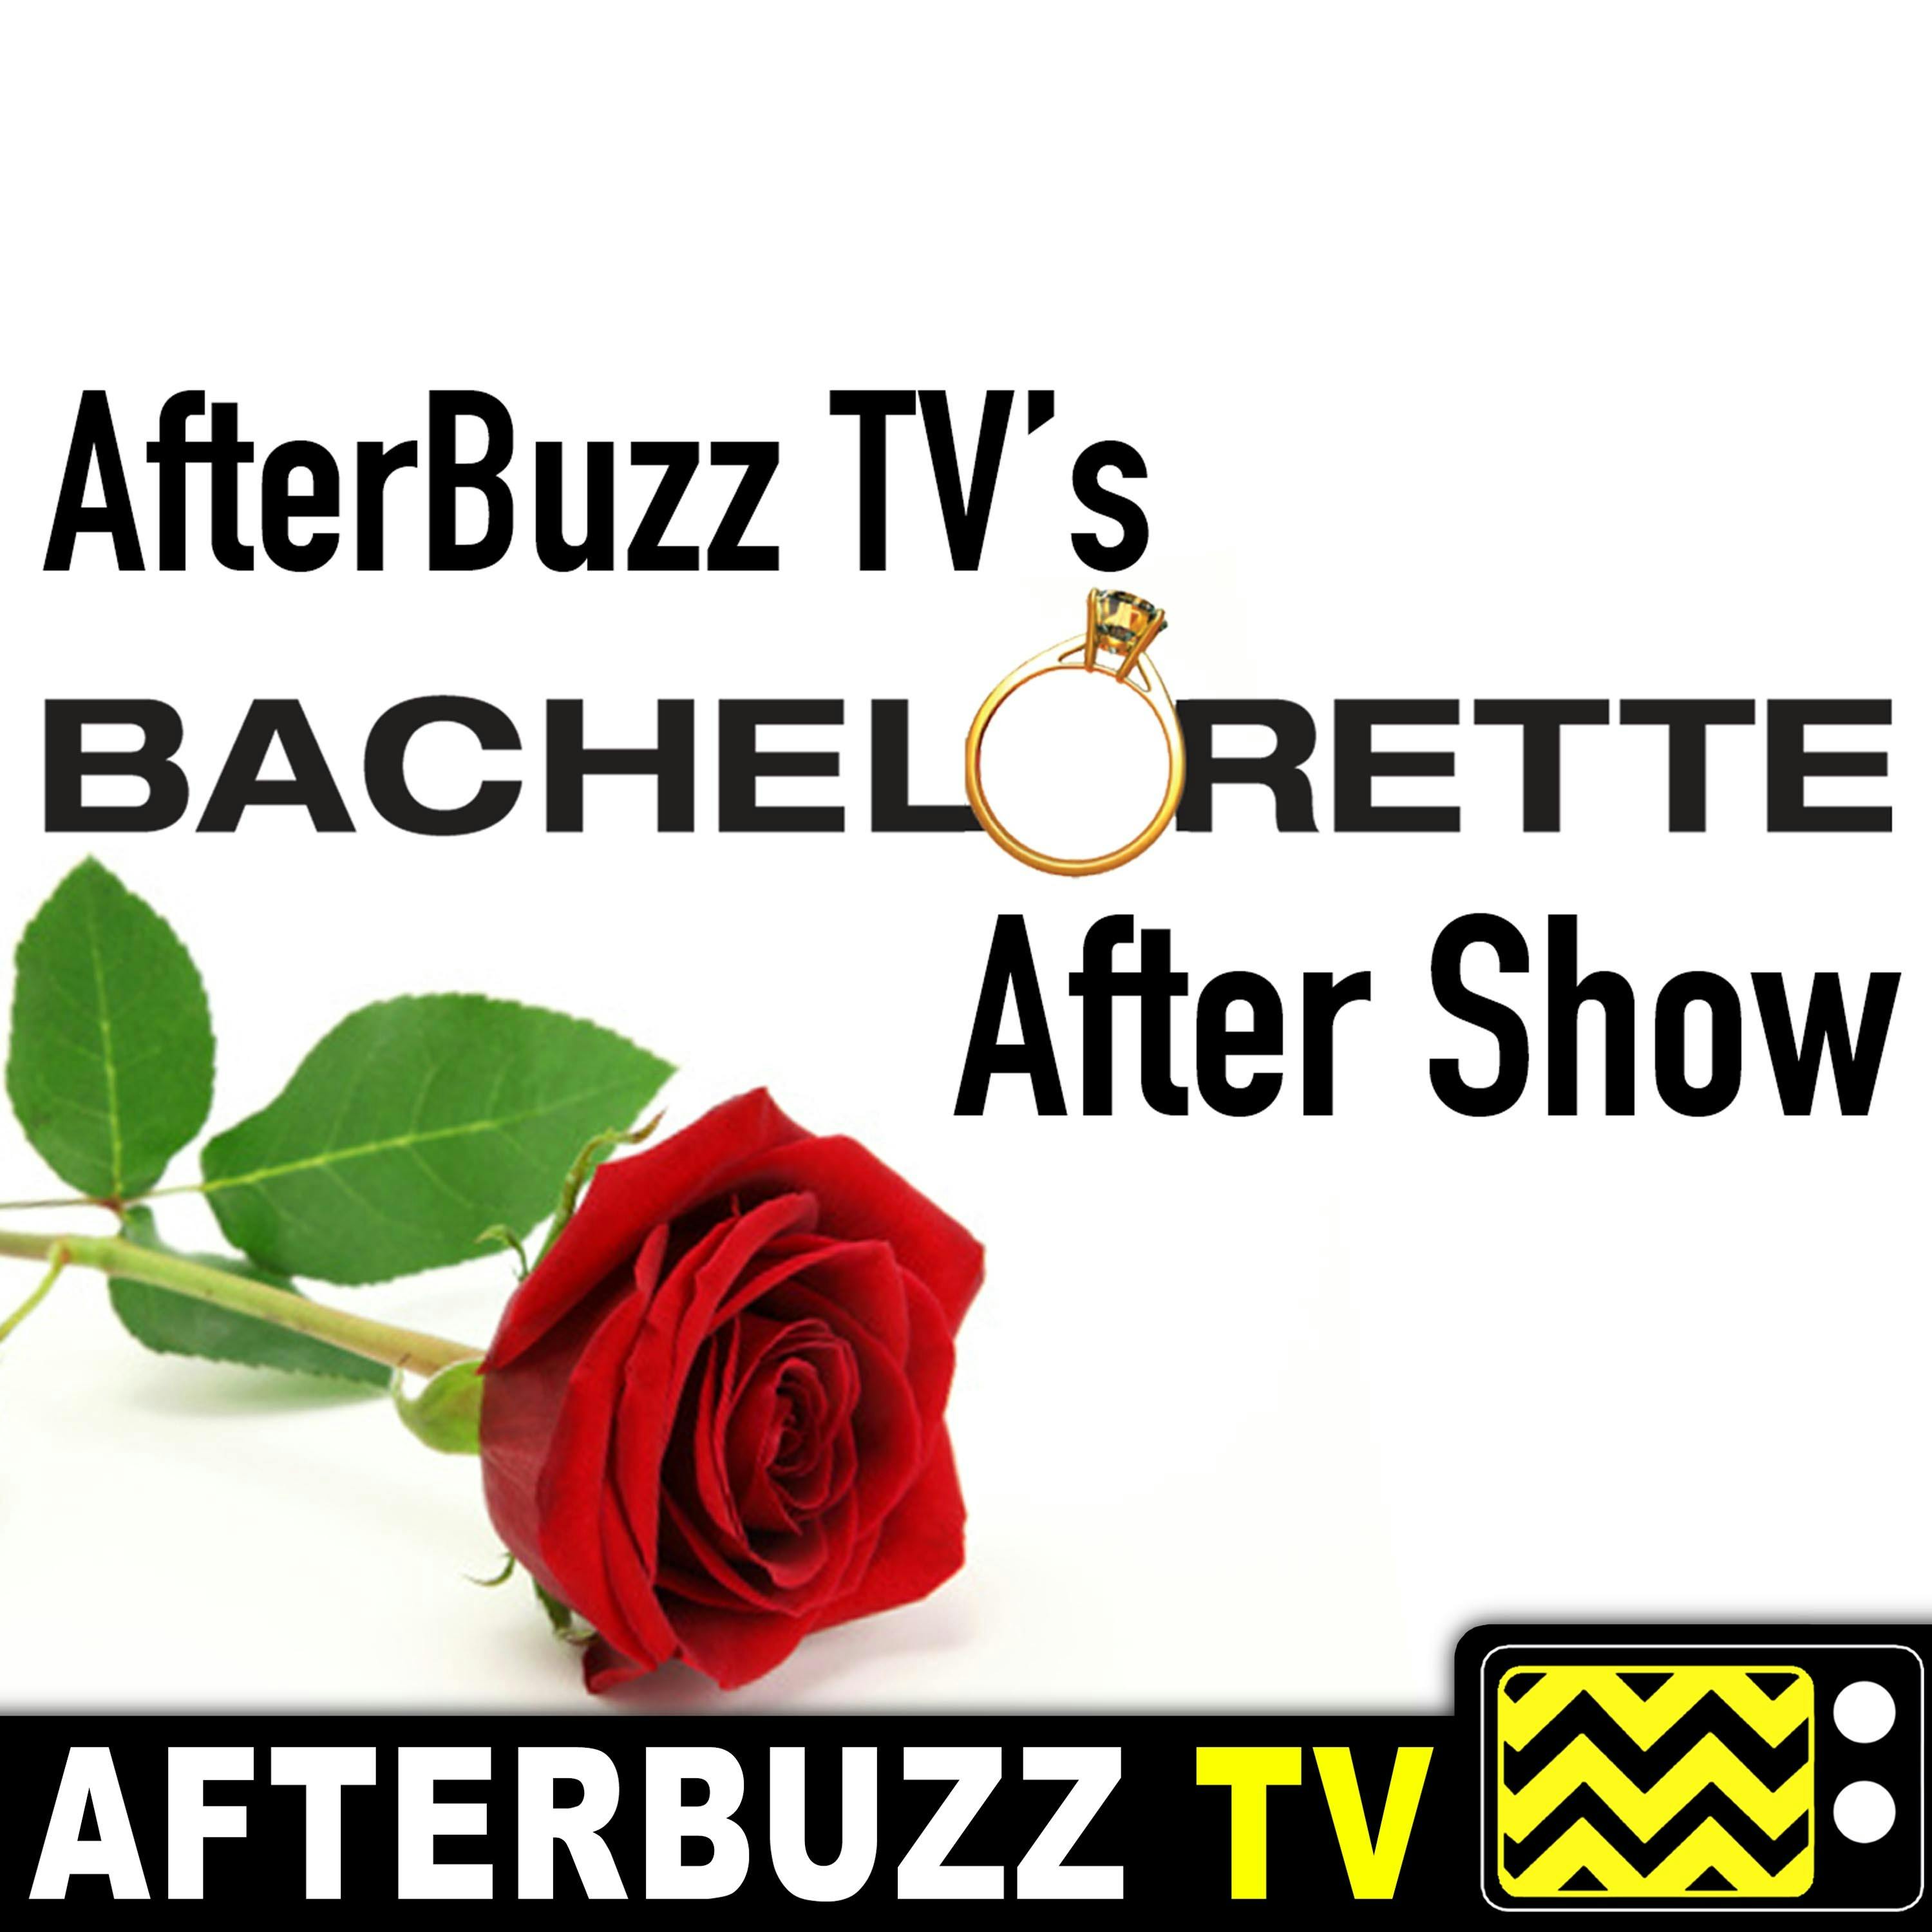 The Bachelorette S:13 | Episodes 11 and 12 | AfterBuzz TV AfterShow